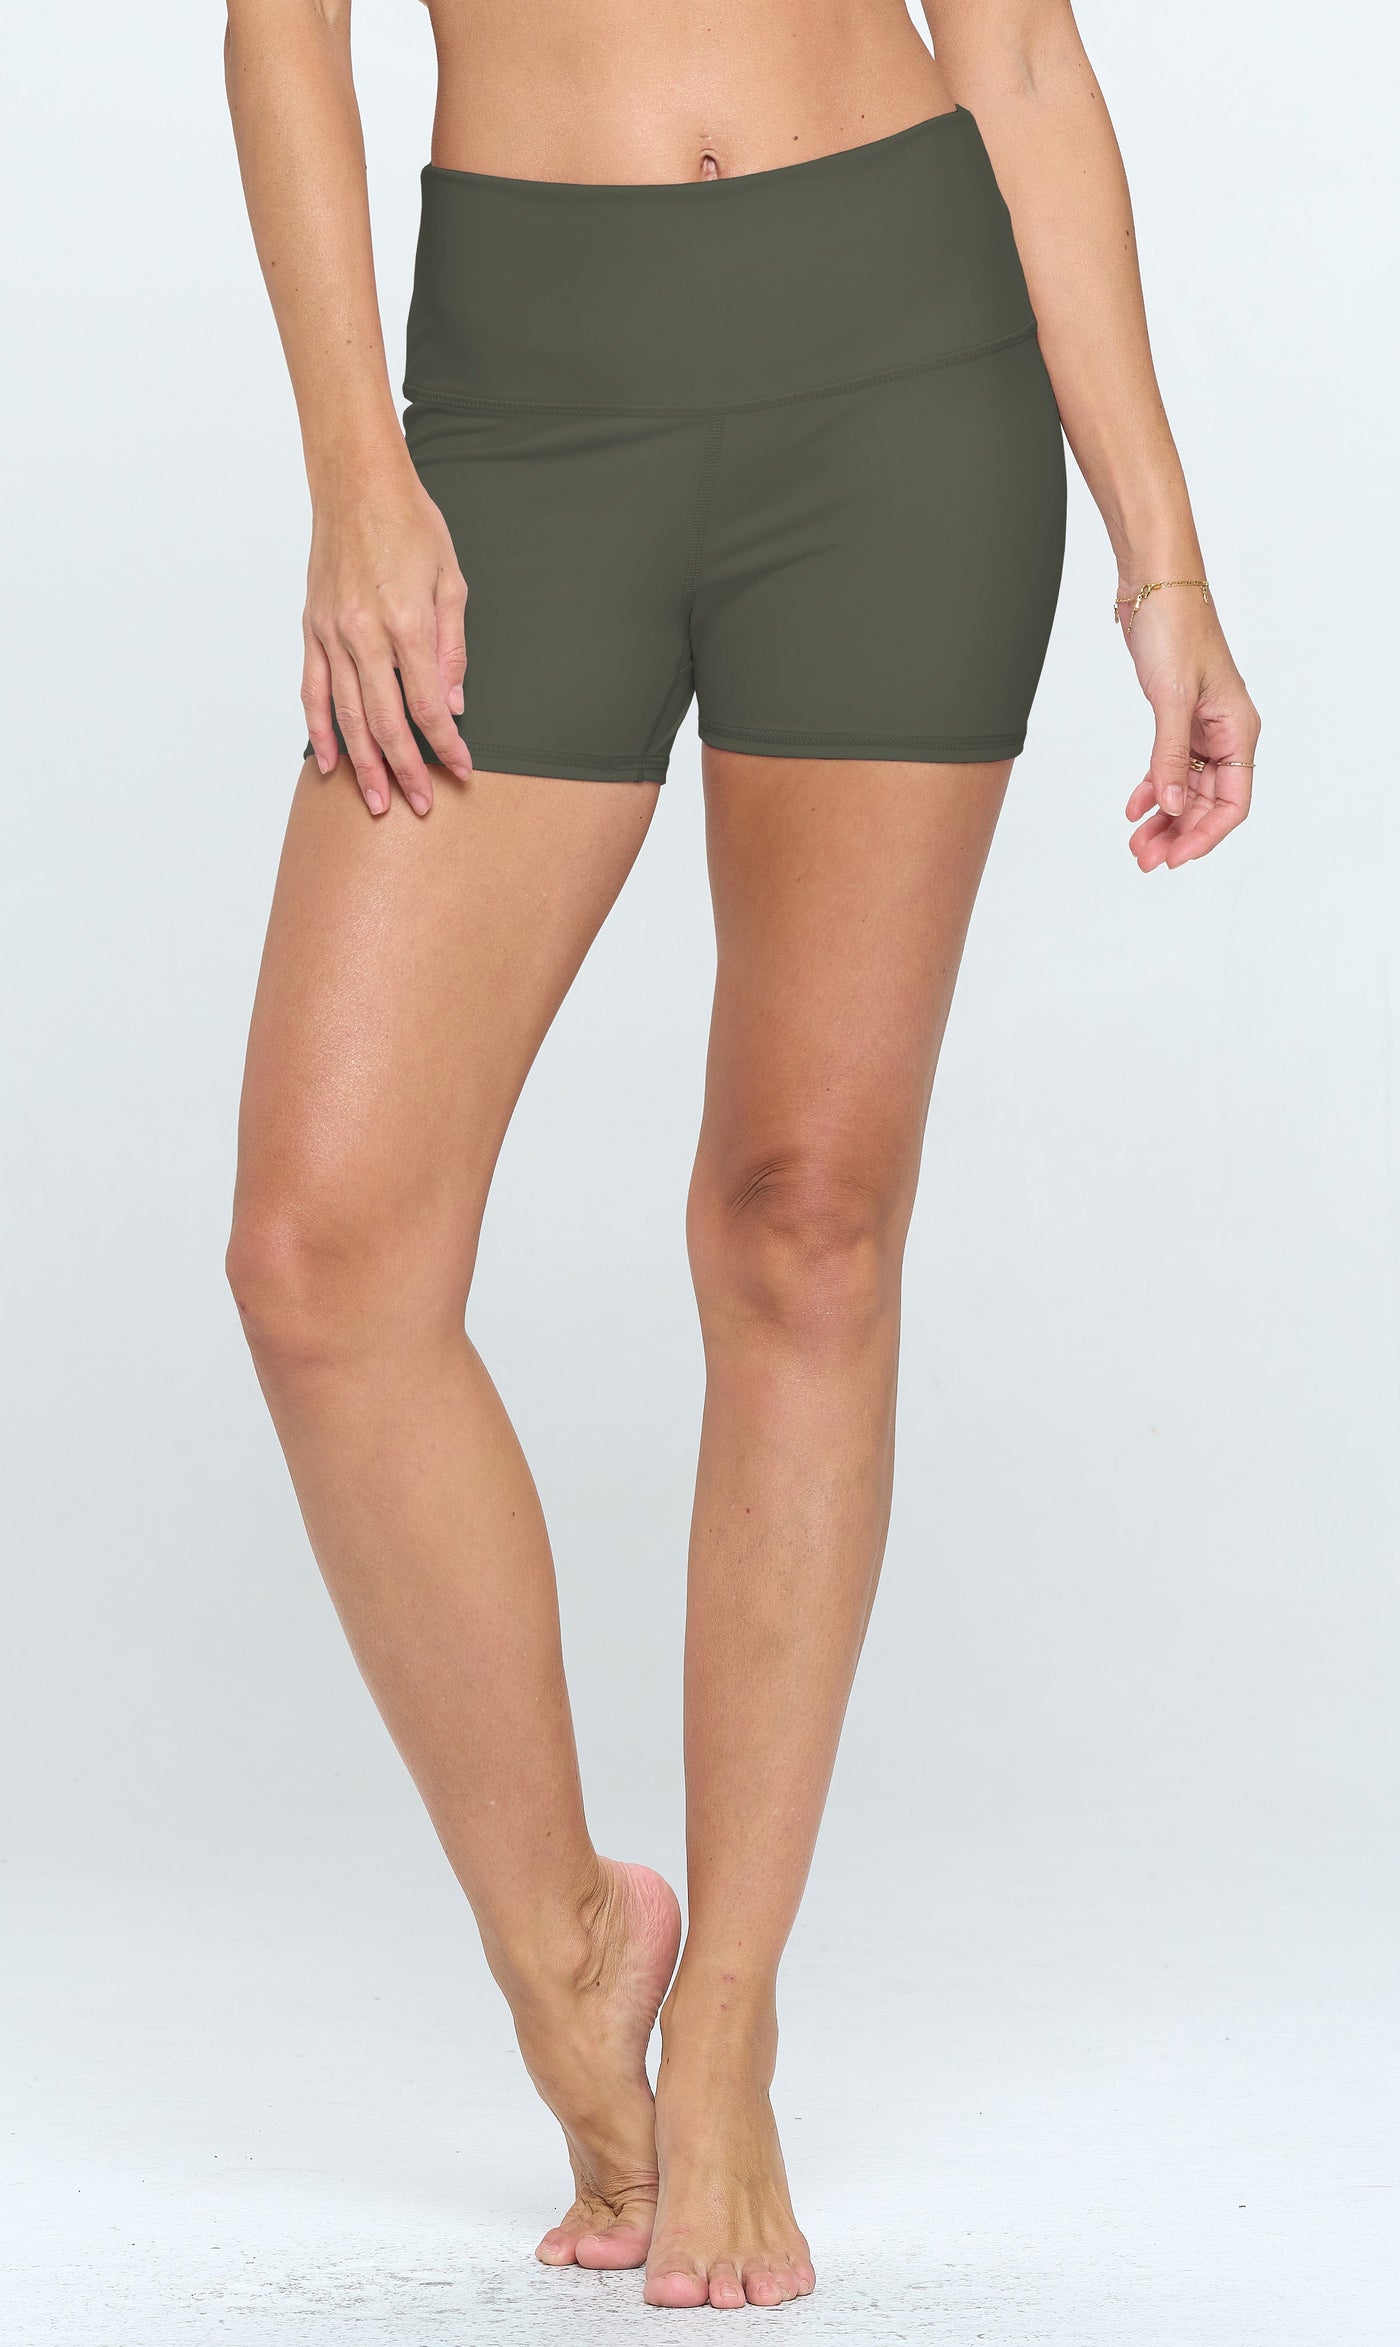 Emma - Agave Green - Booty Shorts 3" (High-Waist) by EVCR